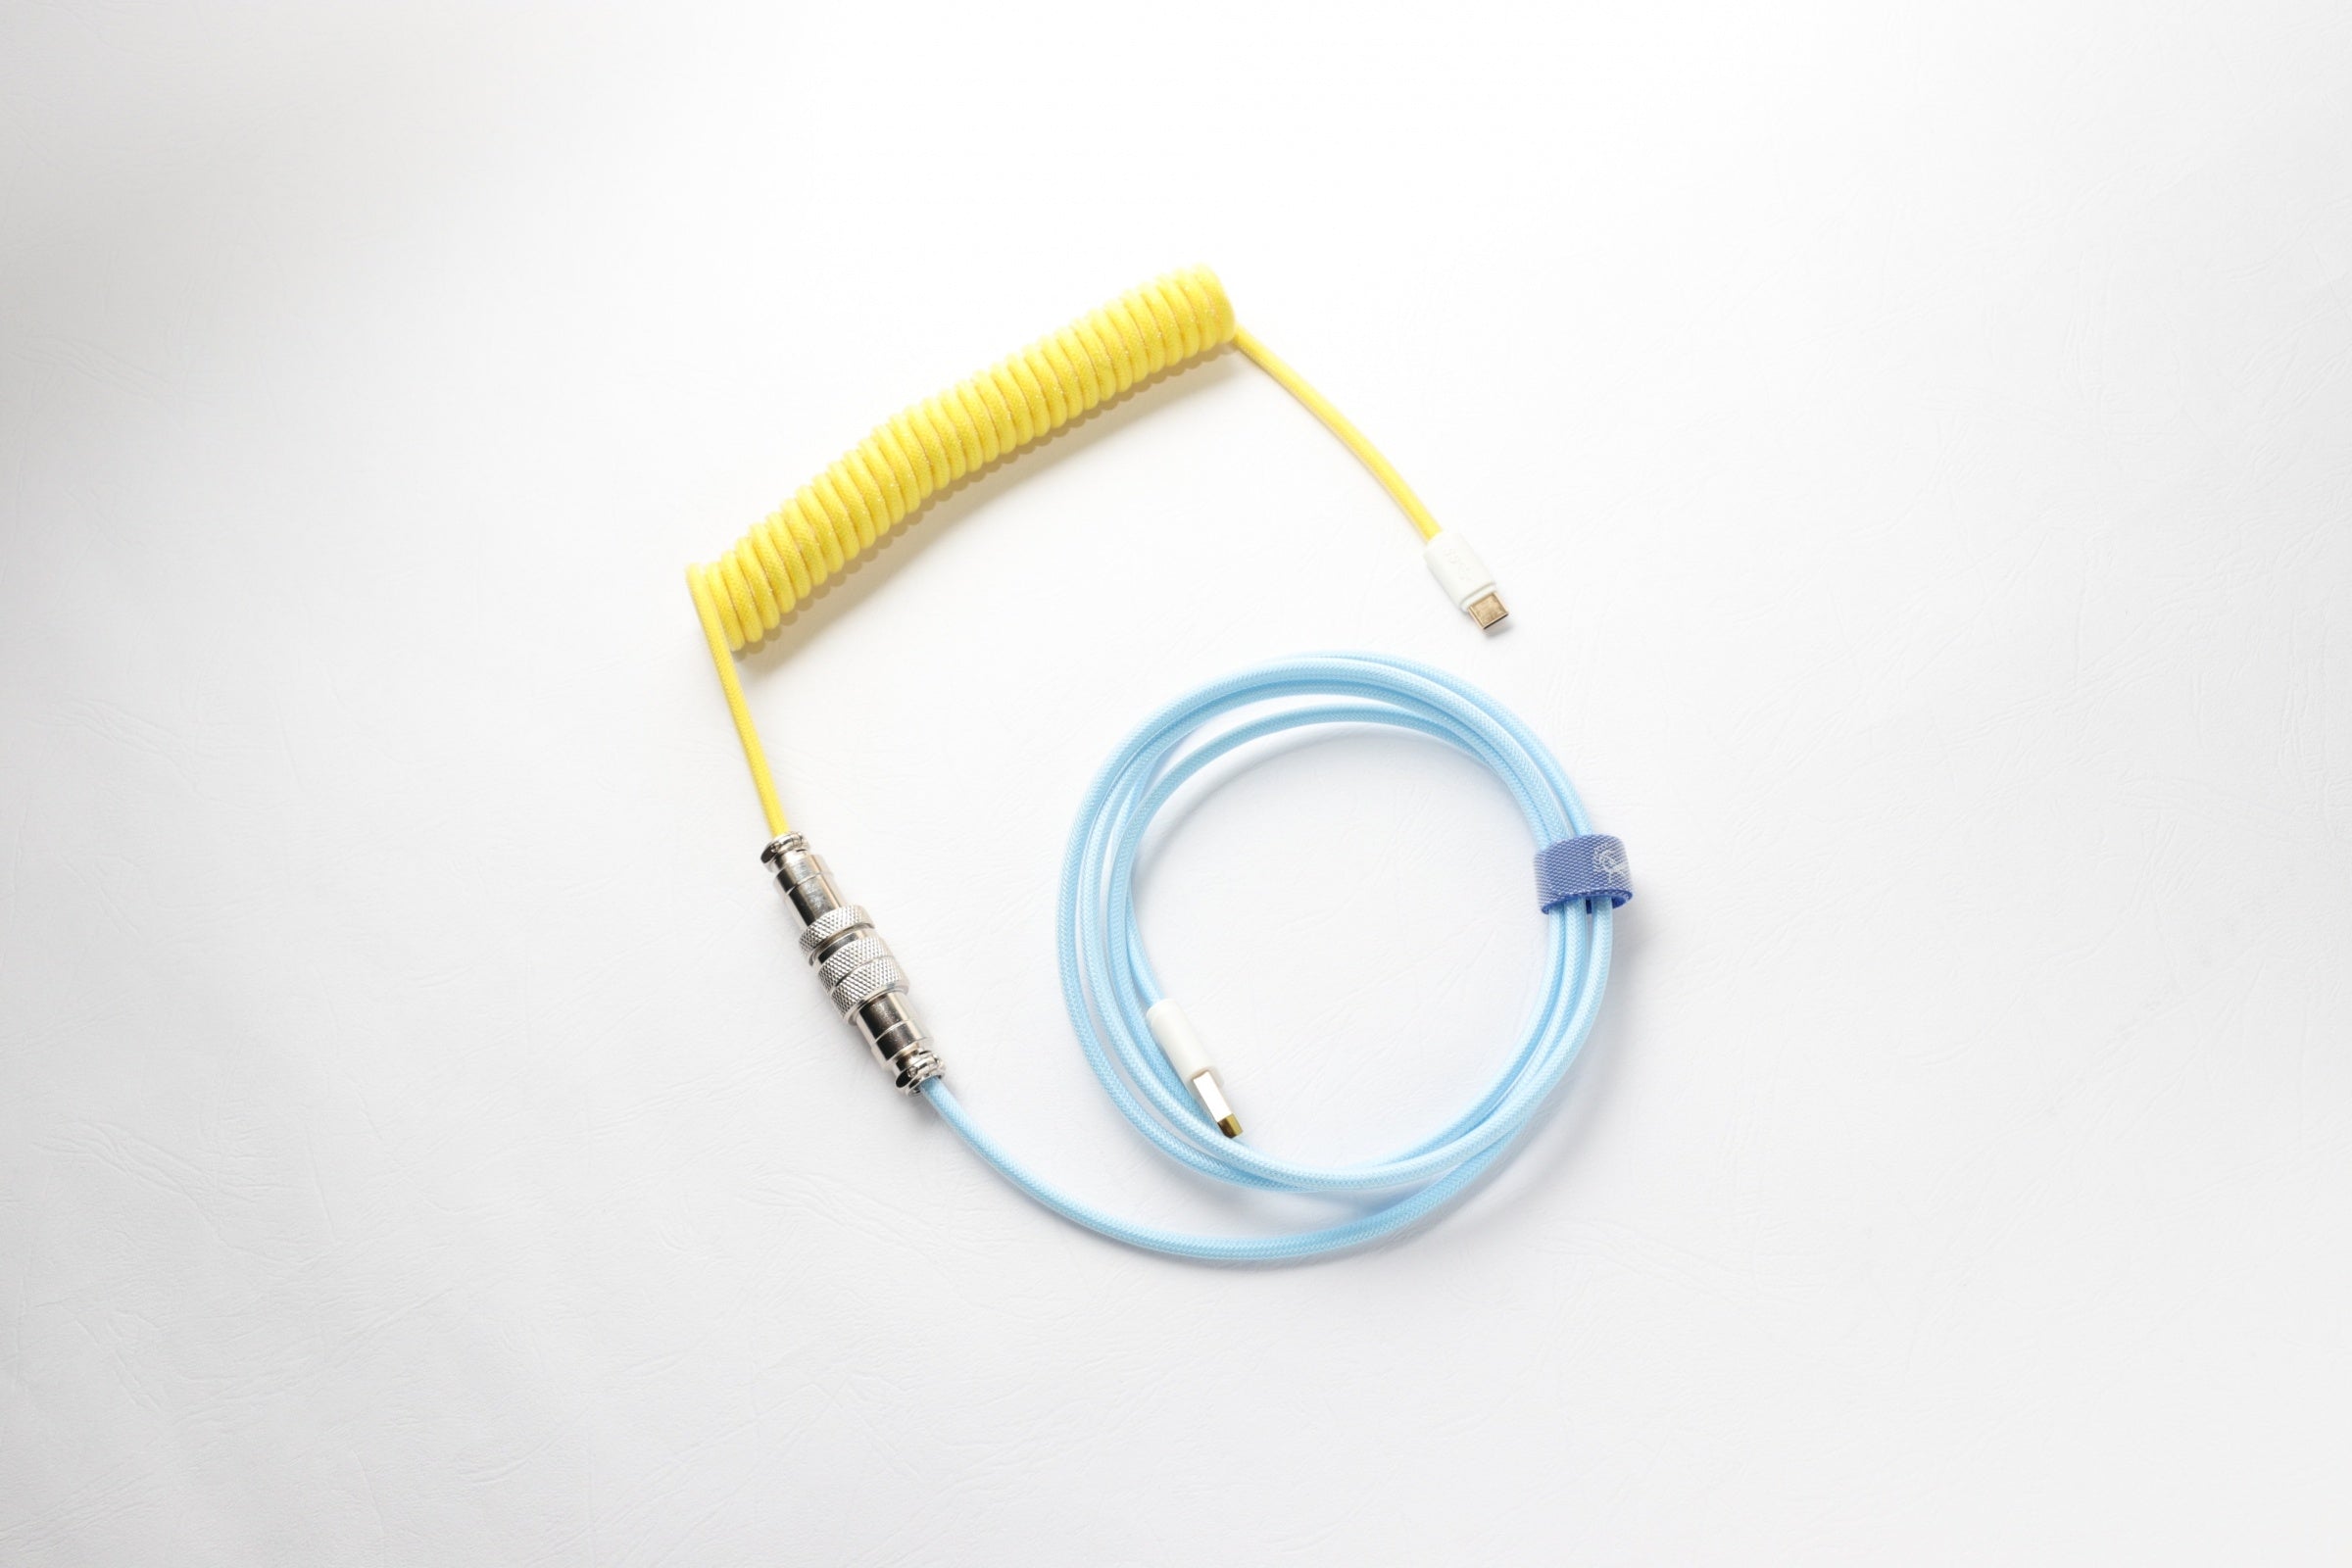 Ducky Cotton Candy Premicord Custom USB Cable MKI0KY13RL |0|